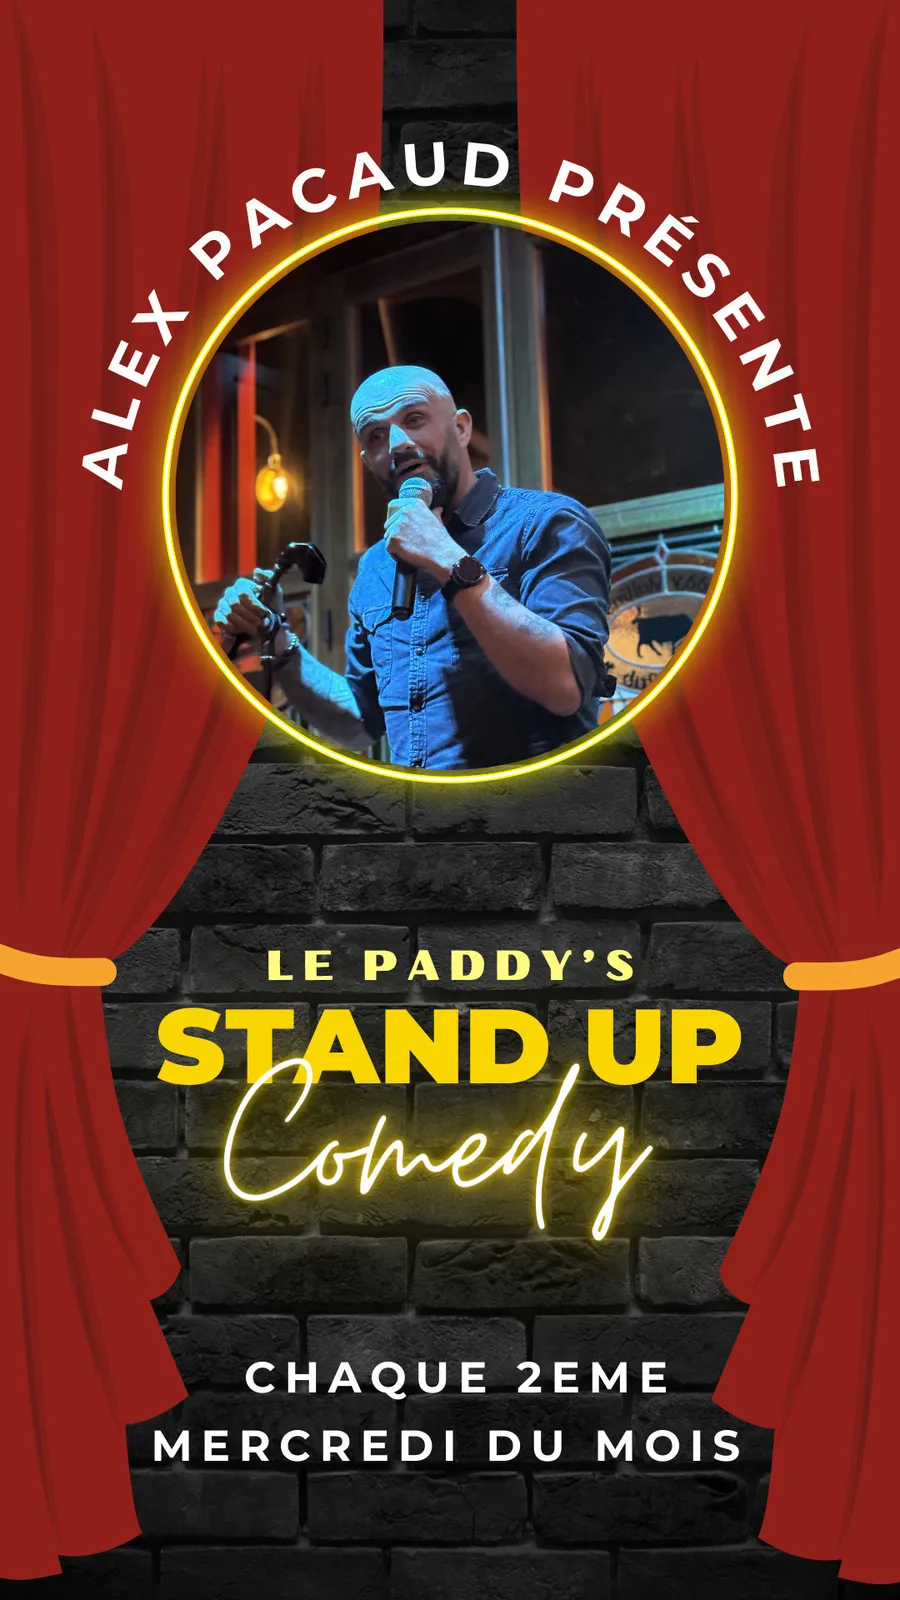 Image du carousel qui illustre: Paddy's stand up comedy à Arles